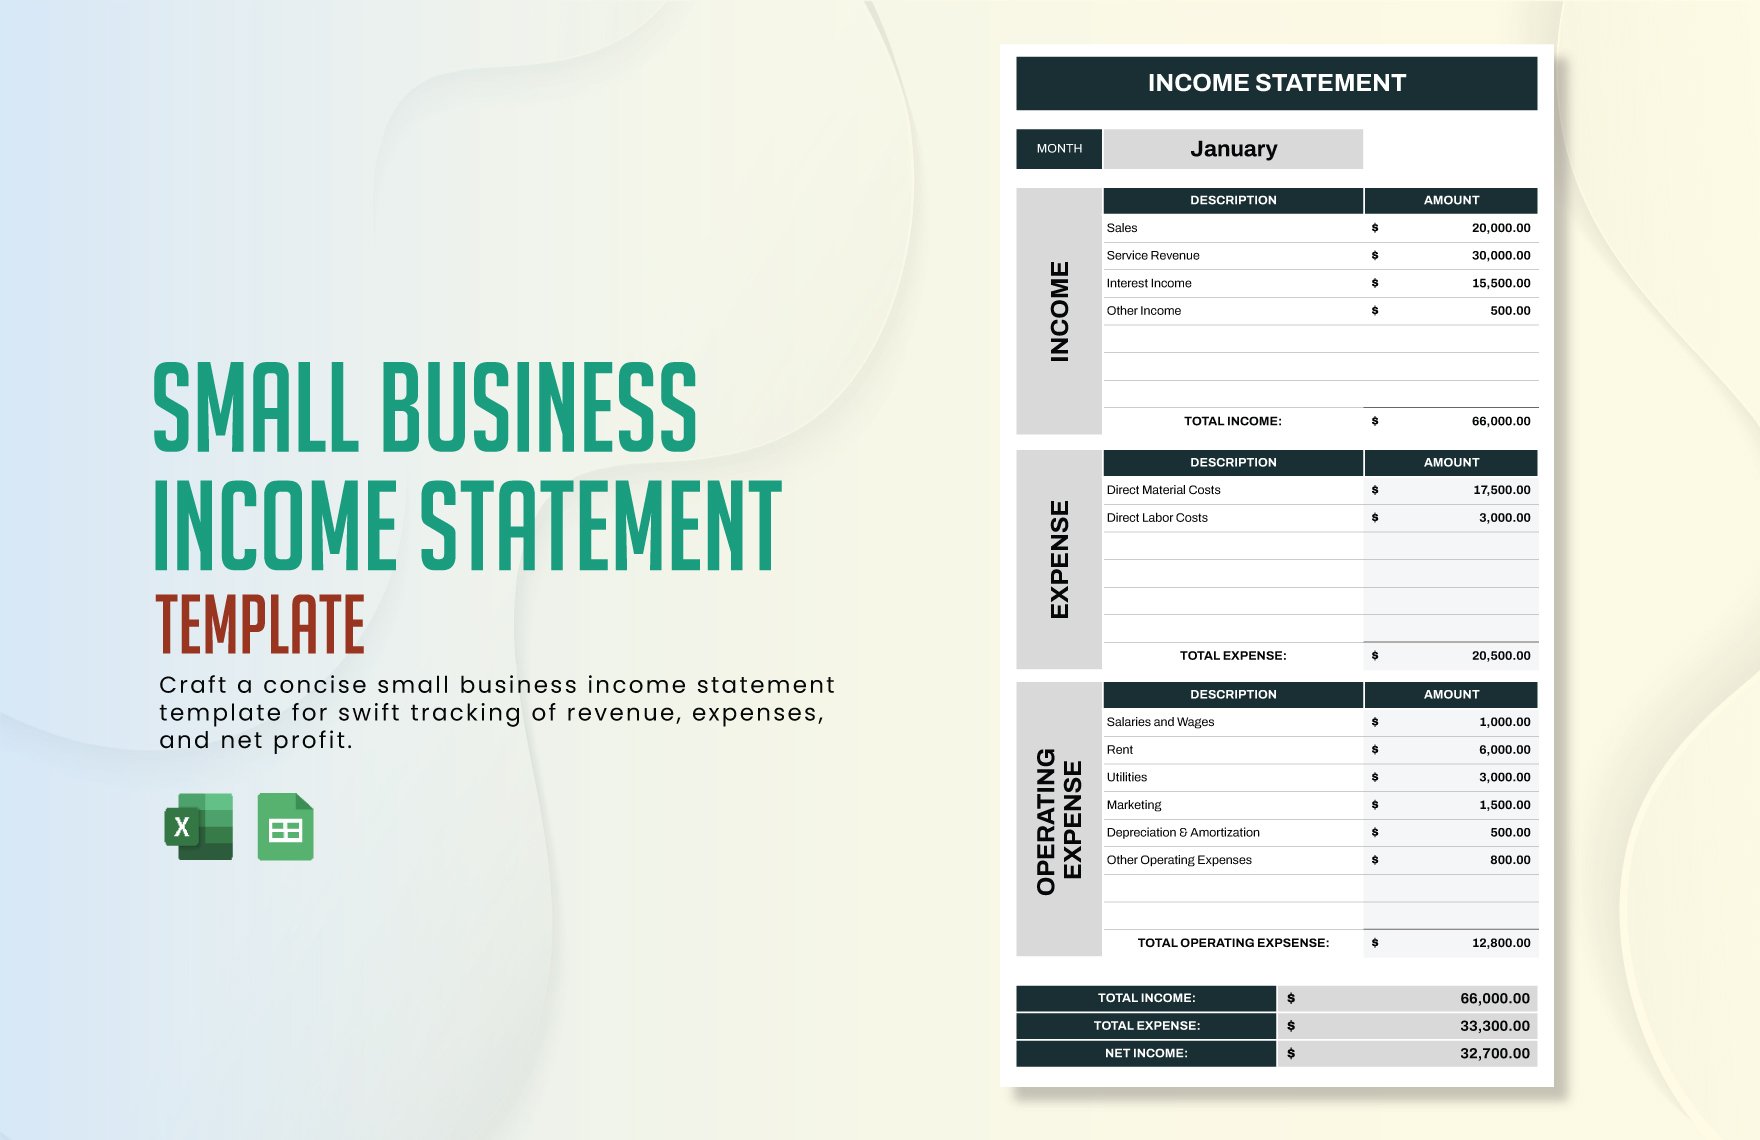 Small Business Income Statement Template in Excel, Google Sheets